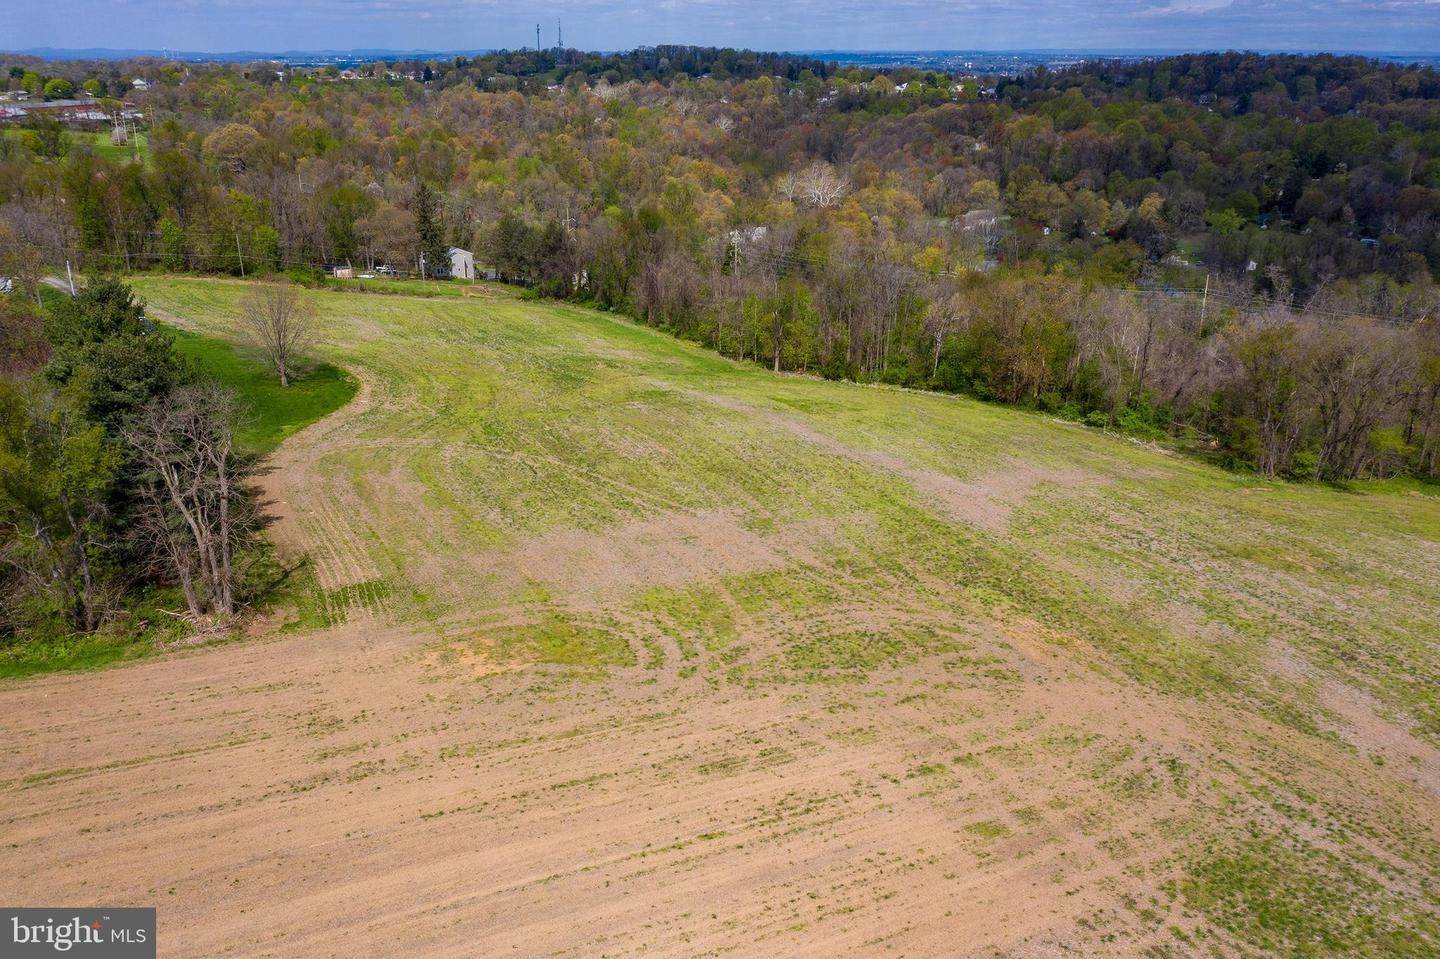 7. Land for Sale at 415-LOT # 1 HEMPFIELD HILL Road Columbia, Pennsylvania 17512 United States